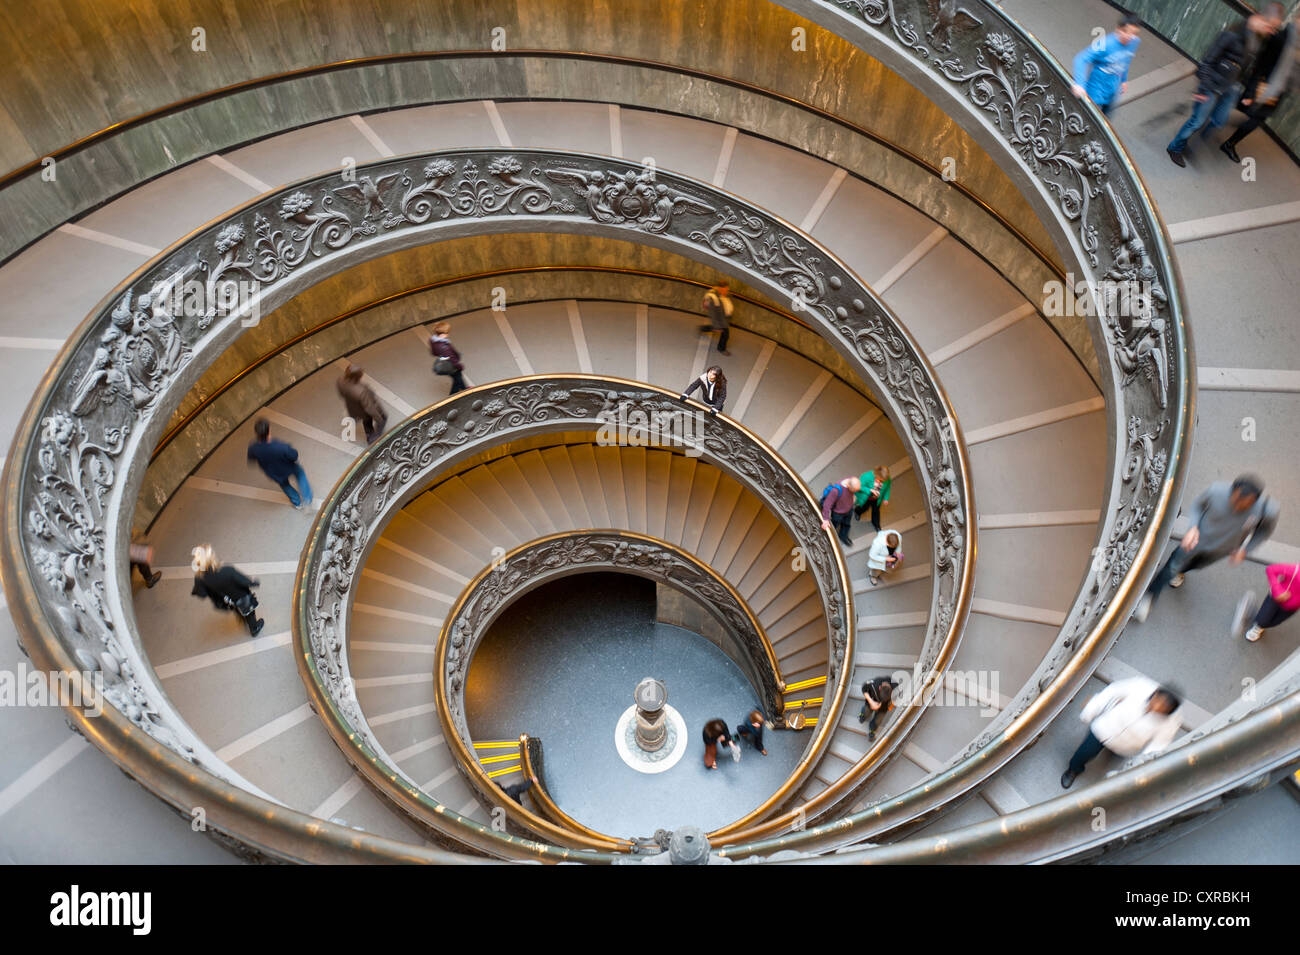 Double-helix of the spiral staircase in the Vatican Museums, Vatican, Vatican City, Rome, Lazio, Italy, Southern Europe, Europe Stock Photo